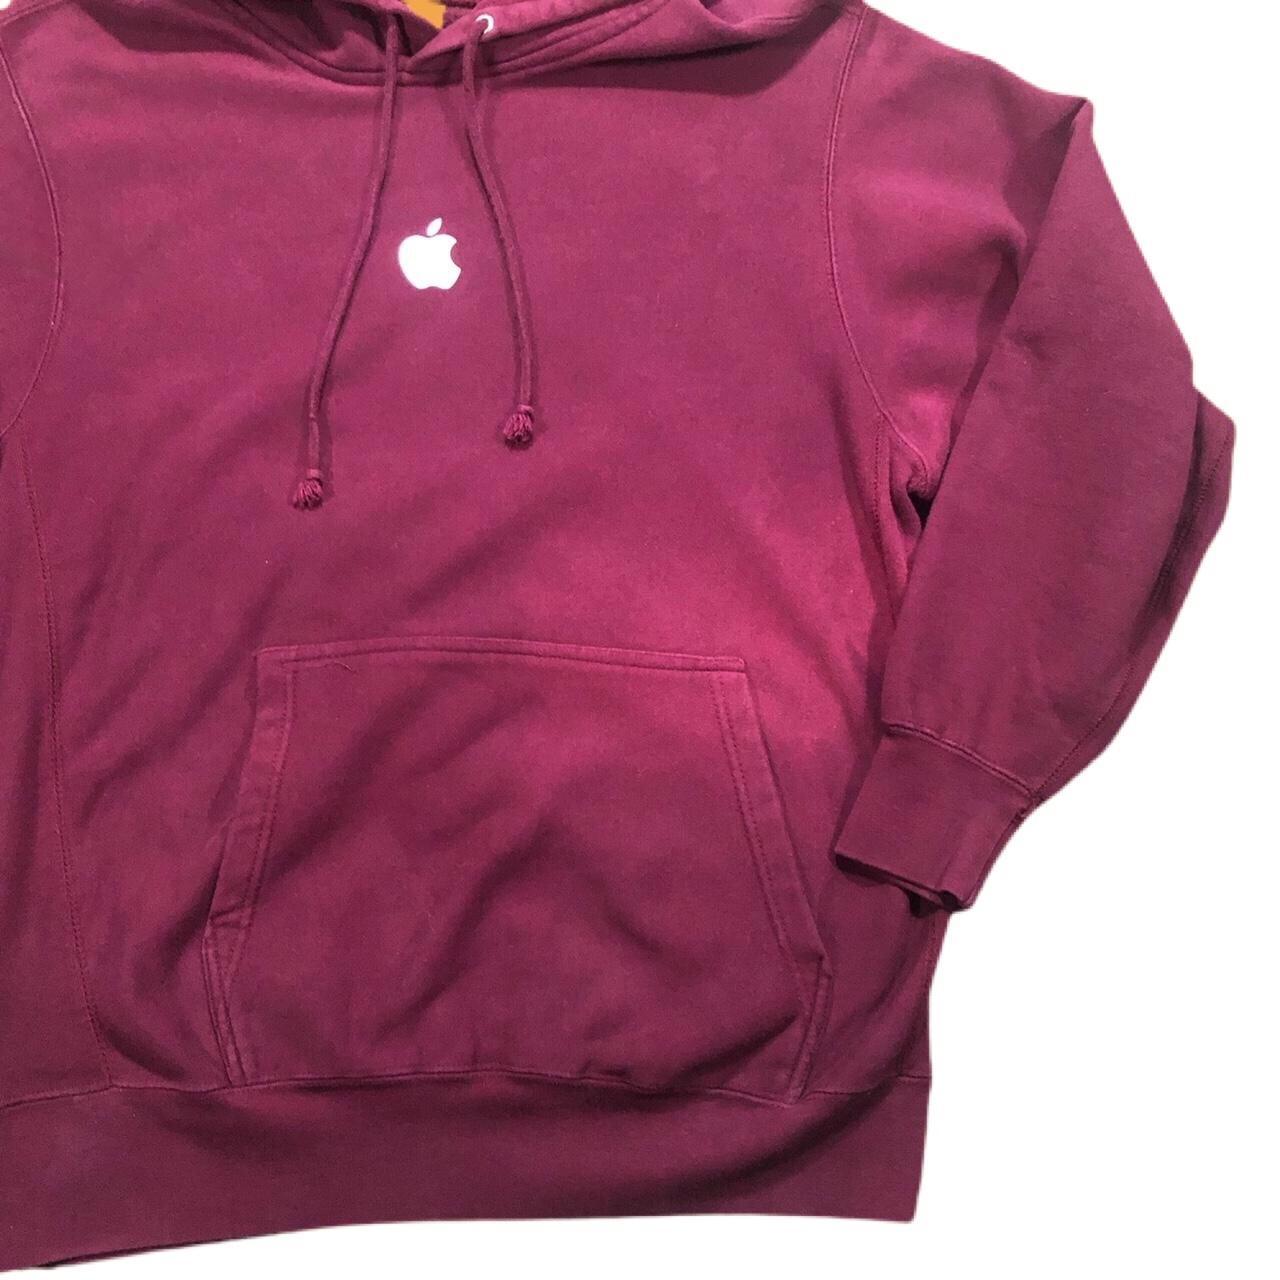 Product Image 2 - Vintage Apple hoodie. Some discoloring